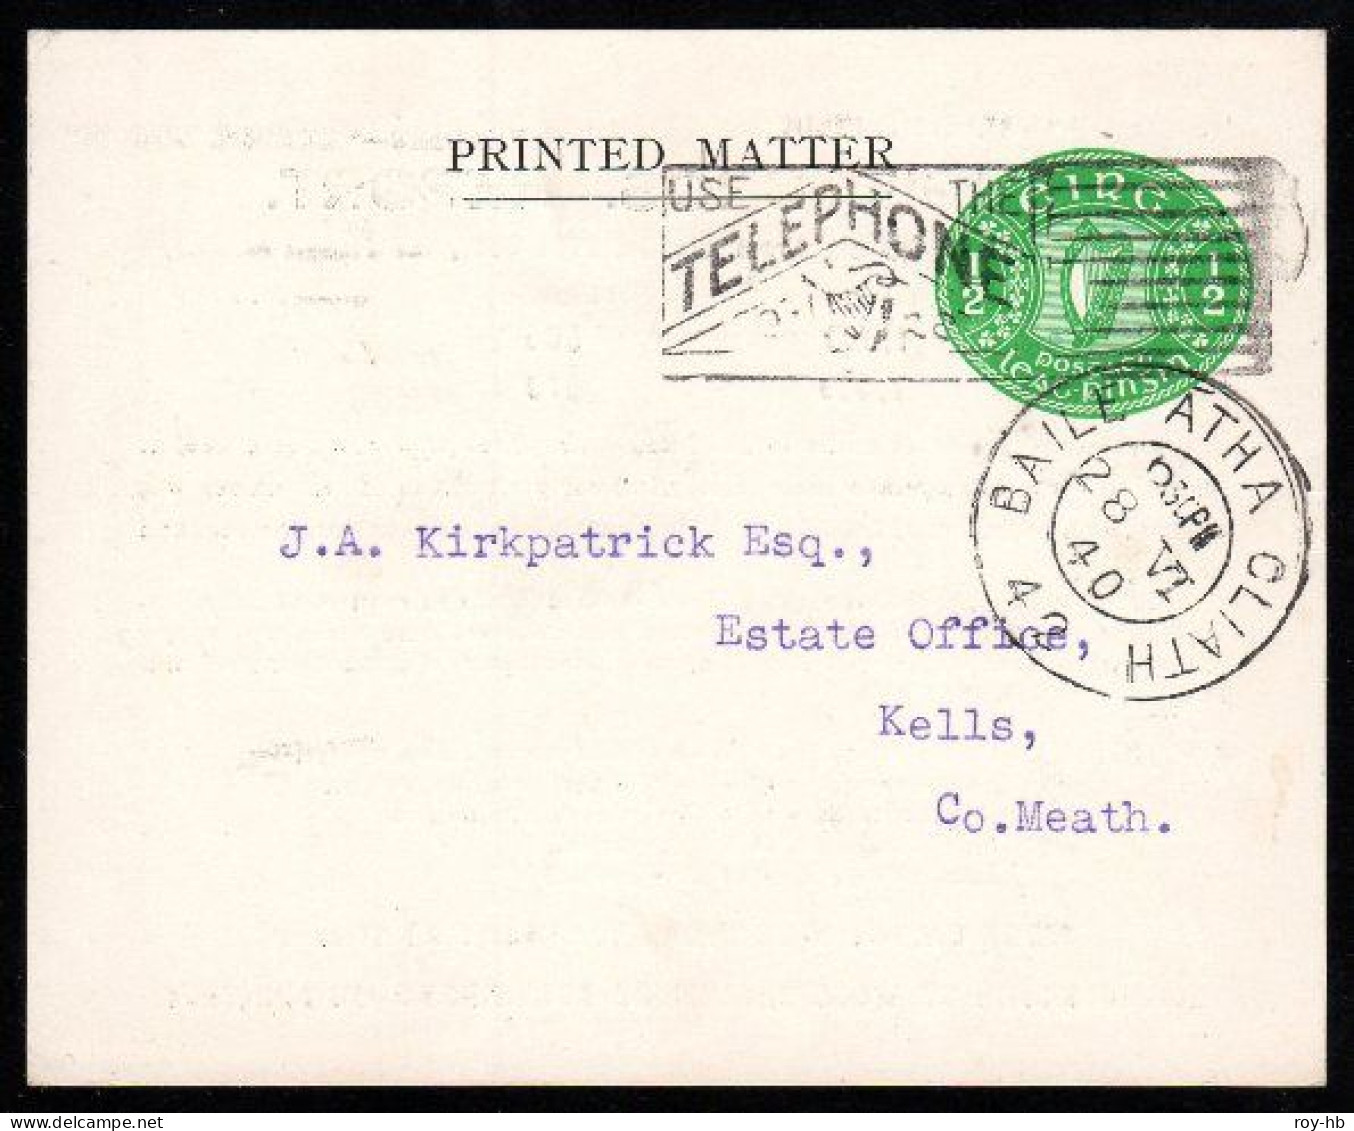 Stamped To Order Craigie Bros. 1940 ½d Post Card Very Fine Used From Dublin To Kells, Very Clean, No Filing Hole. - Ganzsachen